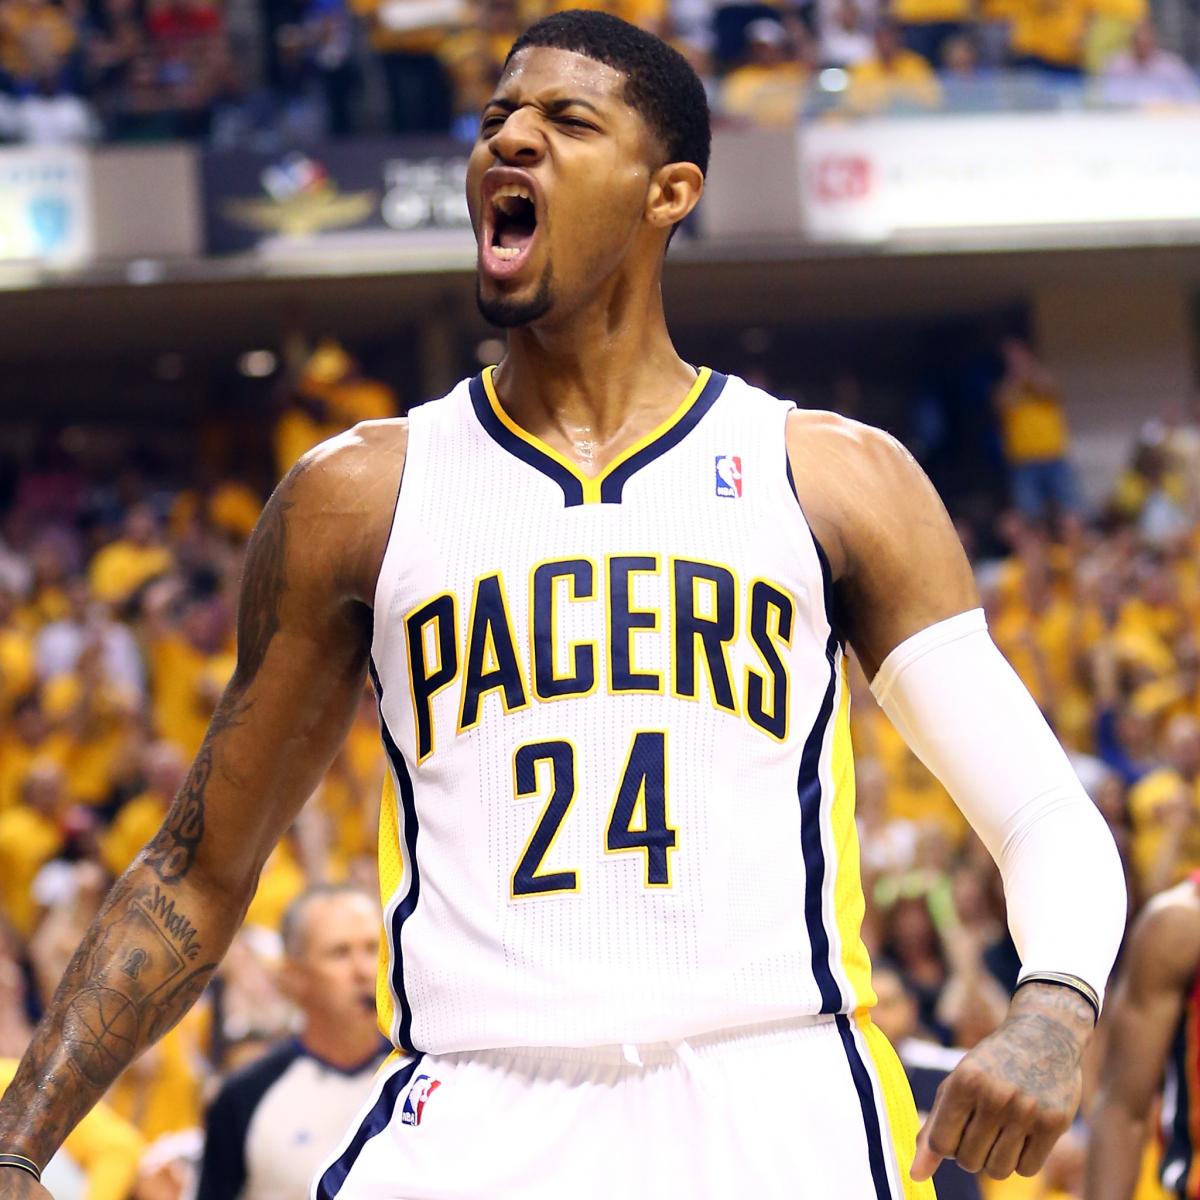 Indiana Pacers – Paul George Signs Extension, Pledges Effort, Leadership,  and Love for Indy